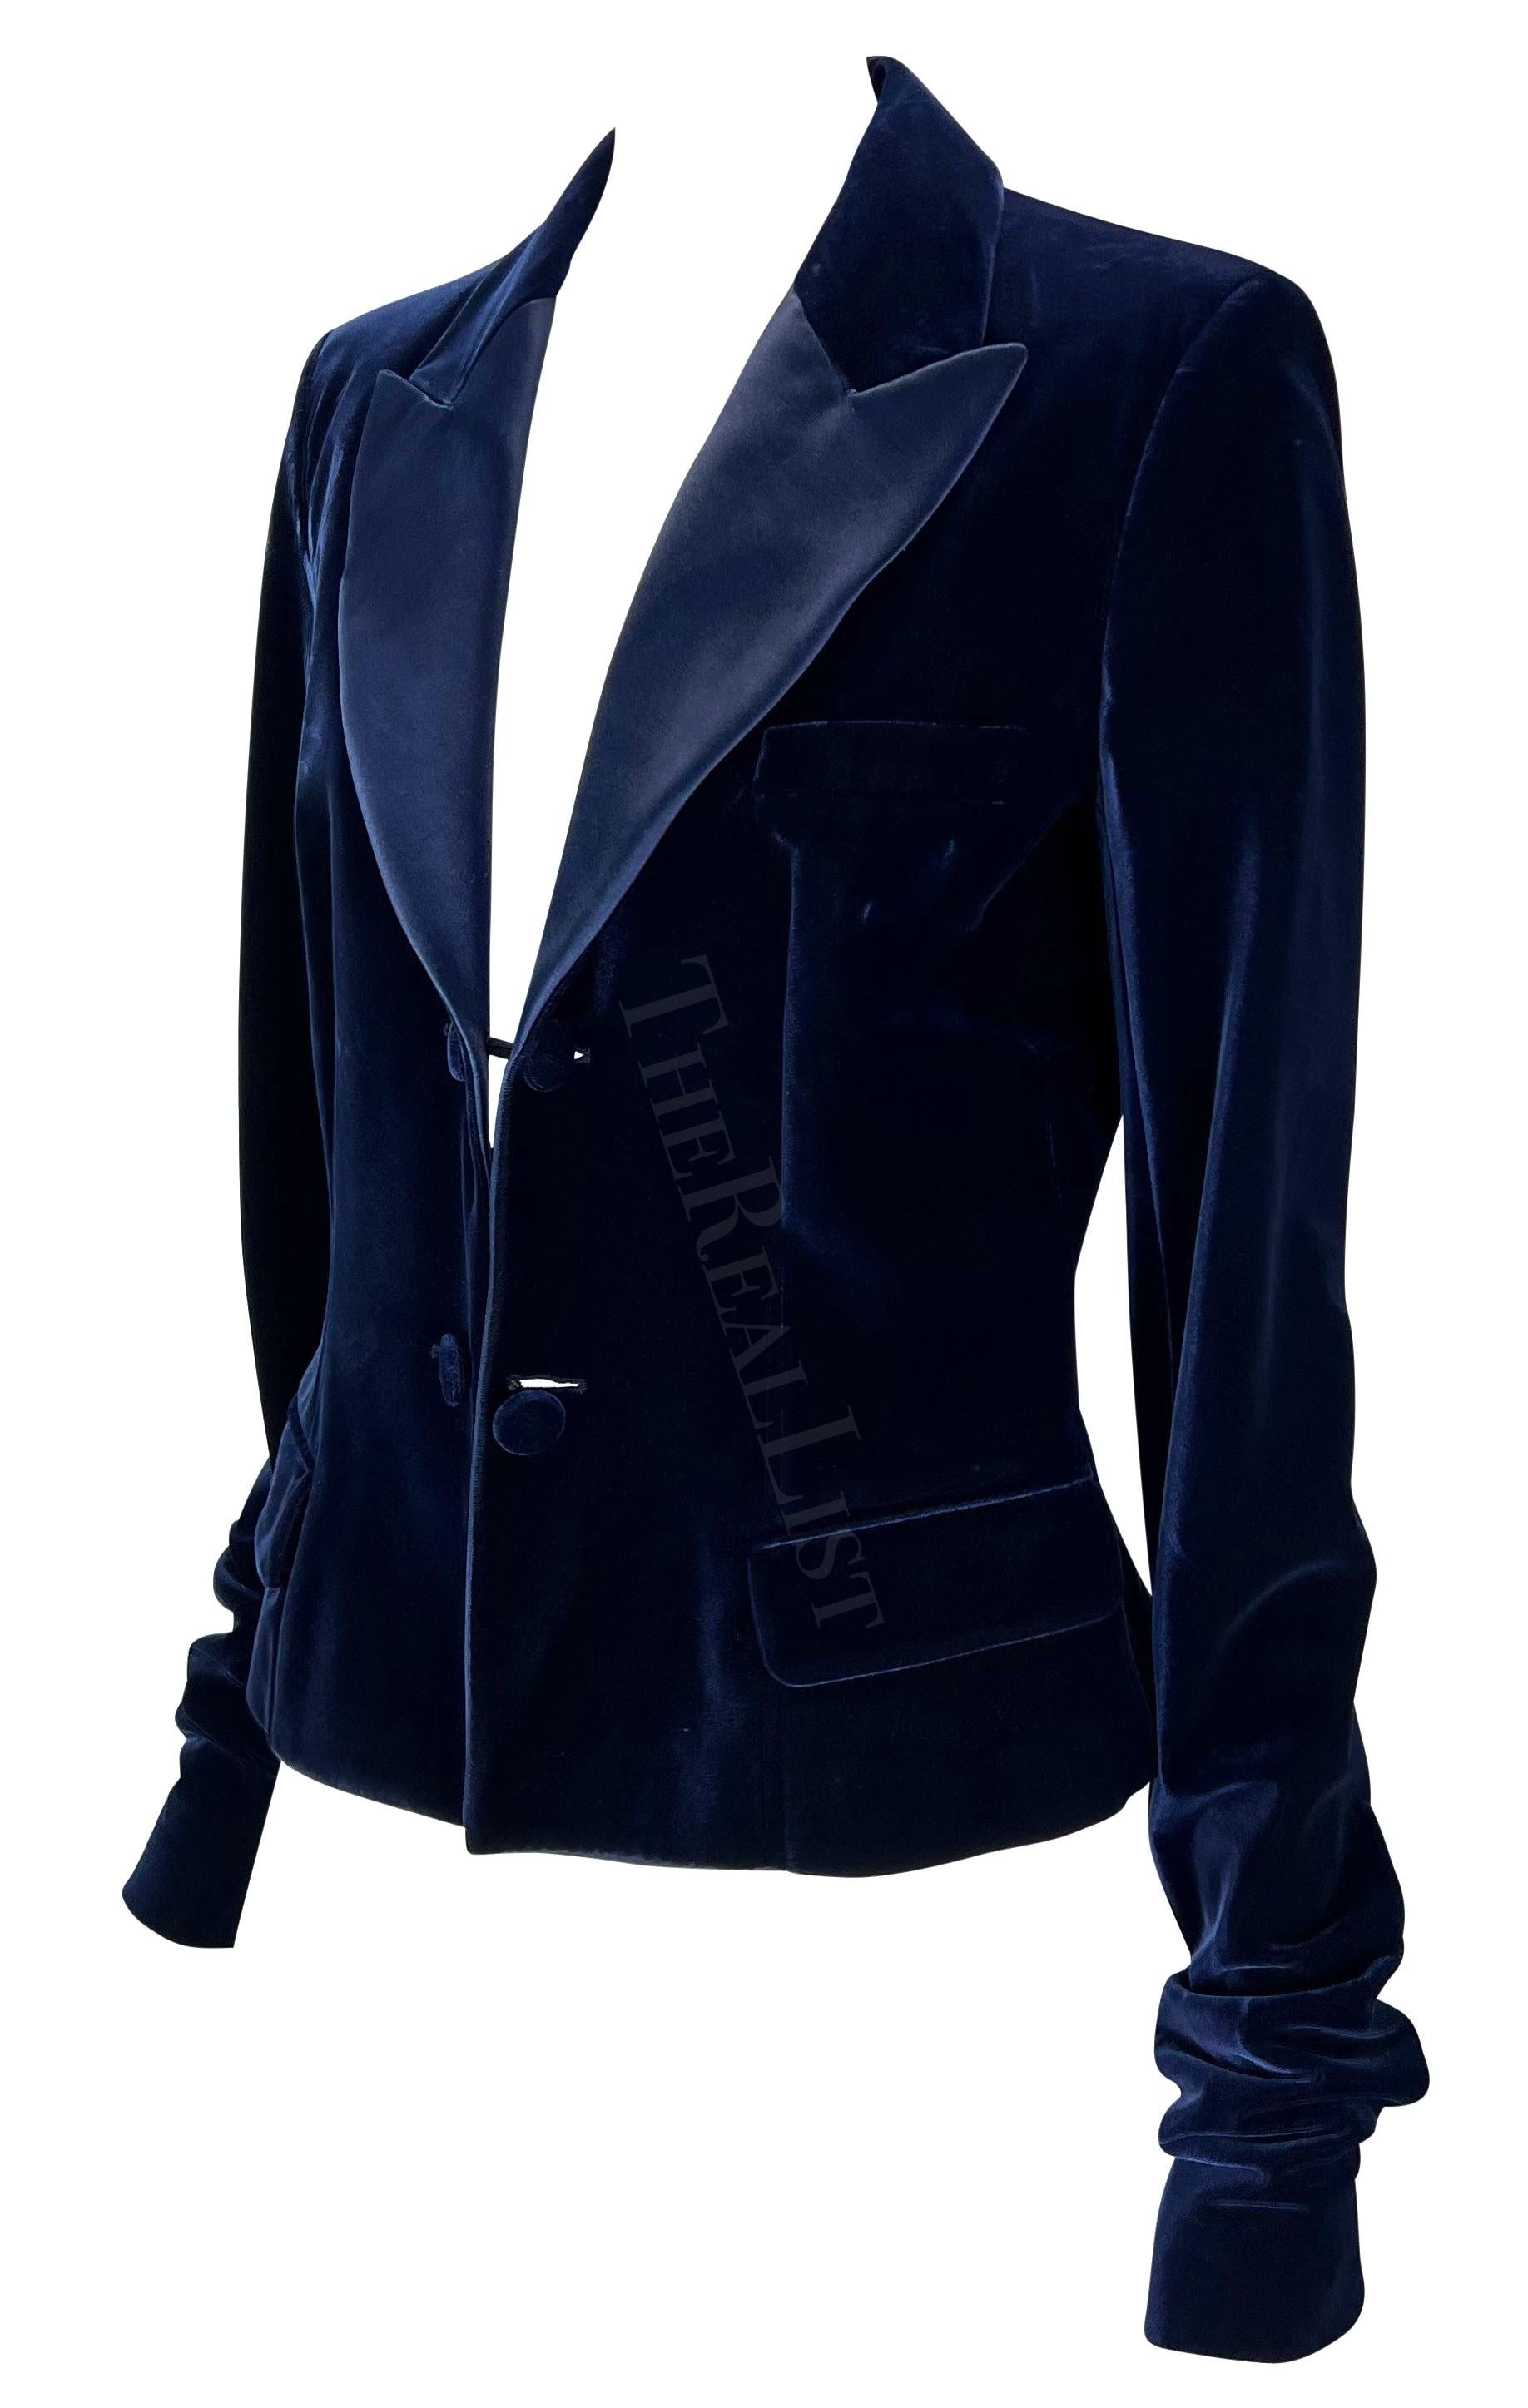 F/W 2002 Yves Saint Laurent by Tom Ford Blue Velvet Runway Blazer In Excellent Condition For Sale In West Hollywood, CA